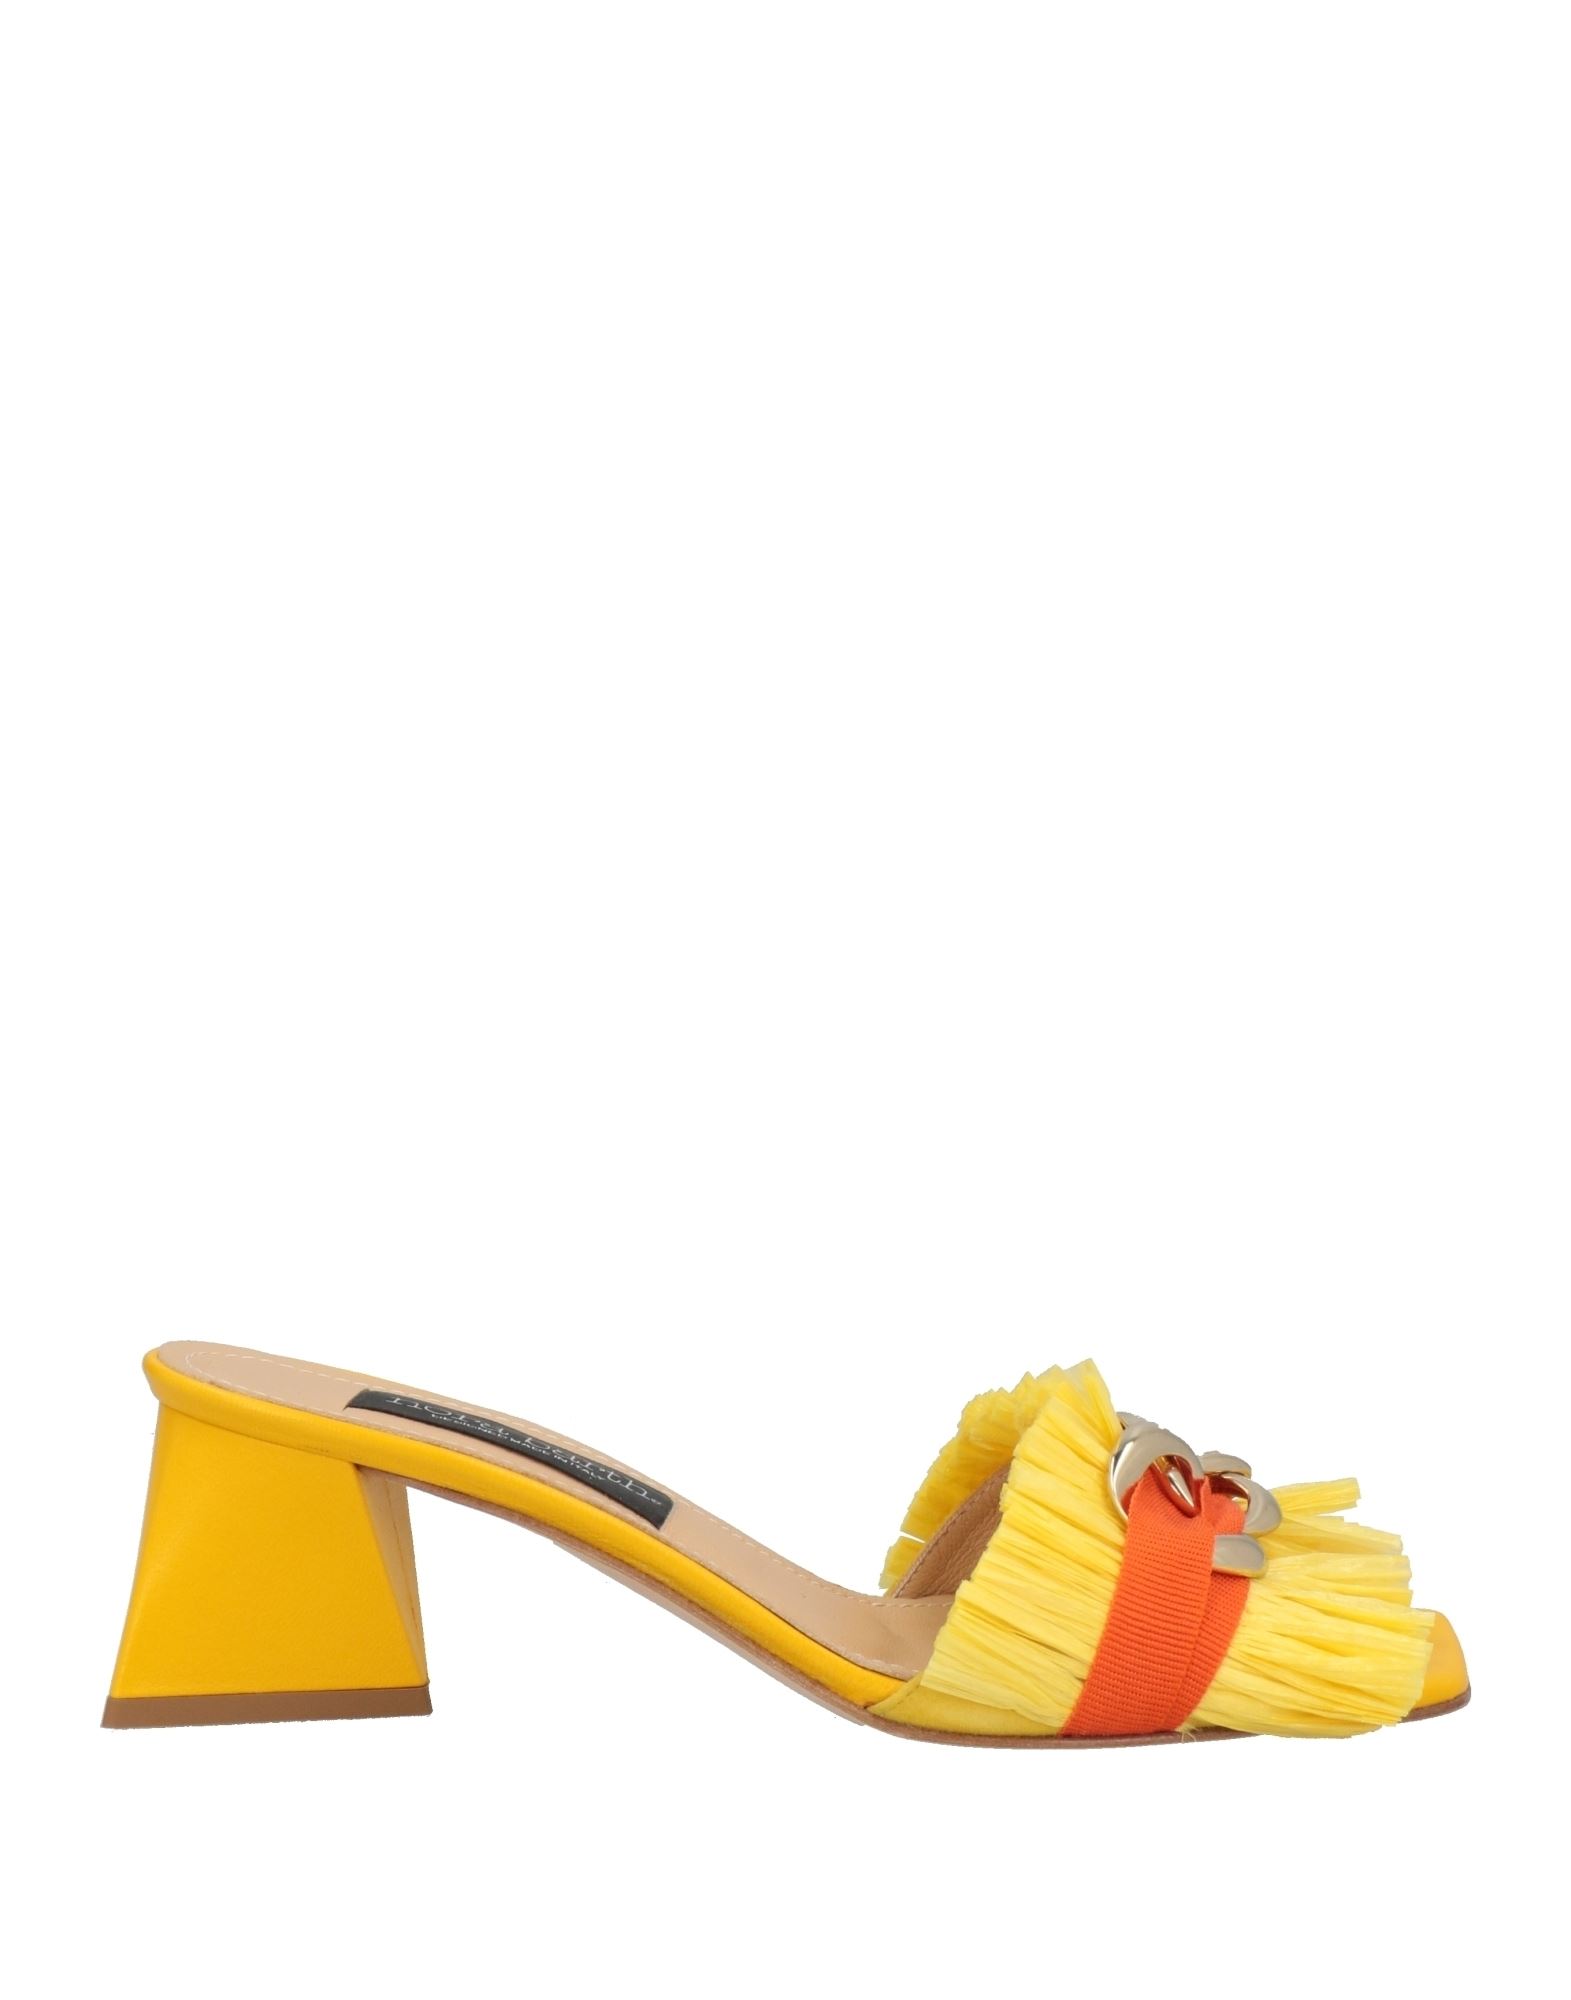 Nora Barth Sandals In Yellow